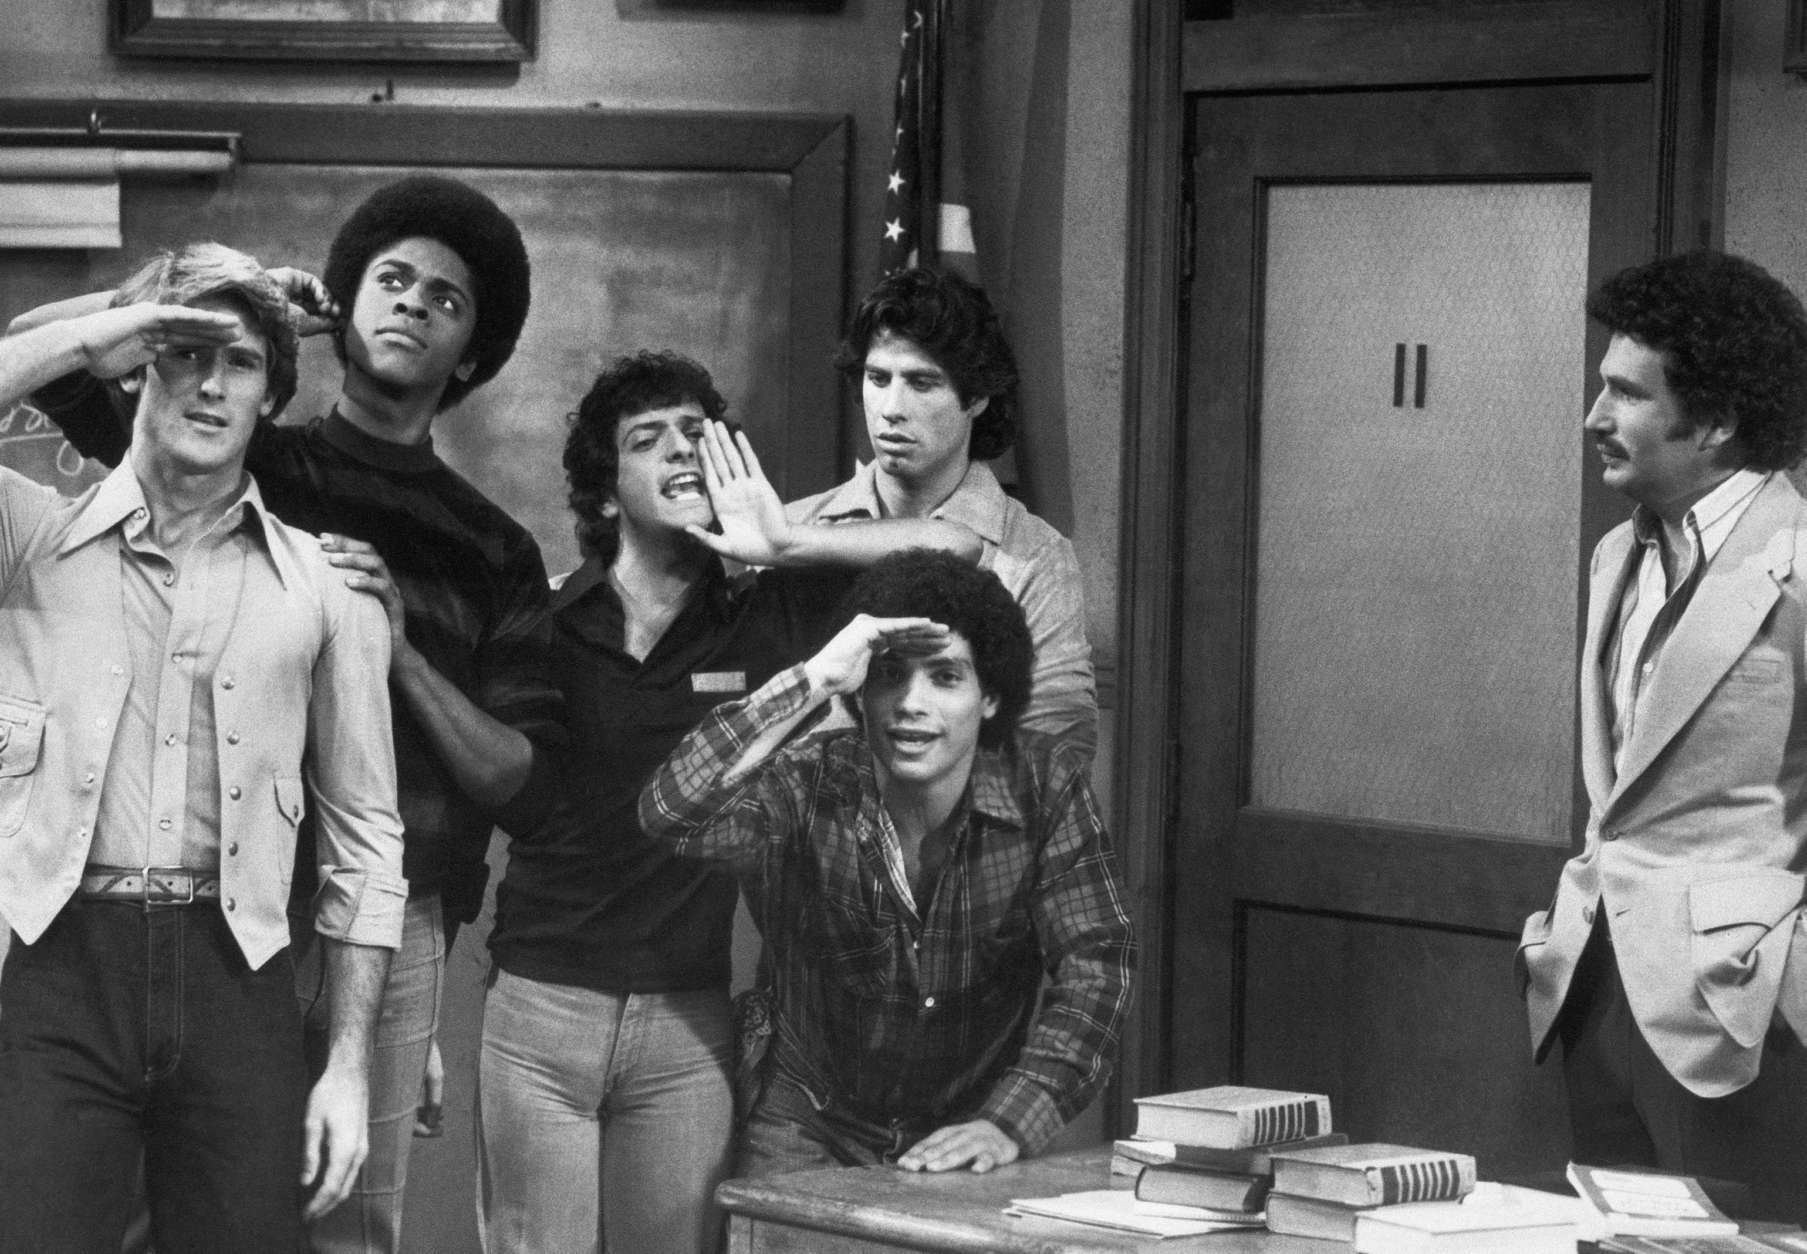 It is either an air and sea search or just more of the sweathog?s antics as performed by the cast of the ABC Television Network?s hit comedy series, ?Welcome Back, Kotter? which airs on Saturday, November 1978 (8:00-8:30 p.m., EST) Starring are (l. to r.)  Stephen Shortridge as the newest sweathog, Beau De Labarre, Lawrence Hilton Jacobs as Freddy Washington, Ron Palillo as Arnold Horshack, Robert Hegyes as Juan Epstein (Foreground), John Travolta (Rear) as Vinnie Barbarino and Gabe Kaplan as Gabe Kotter. (AP Photo)